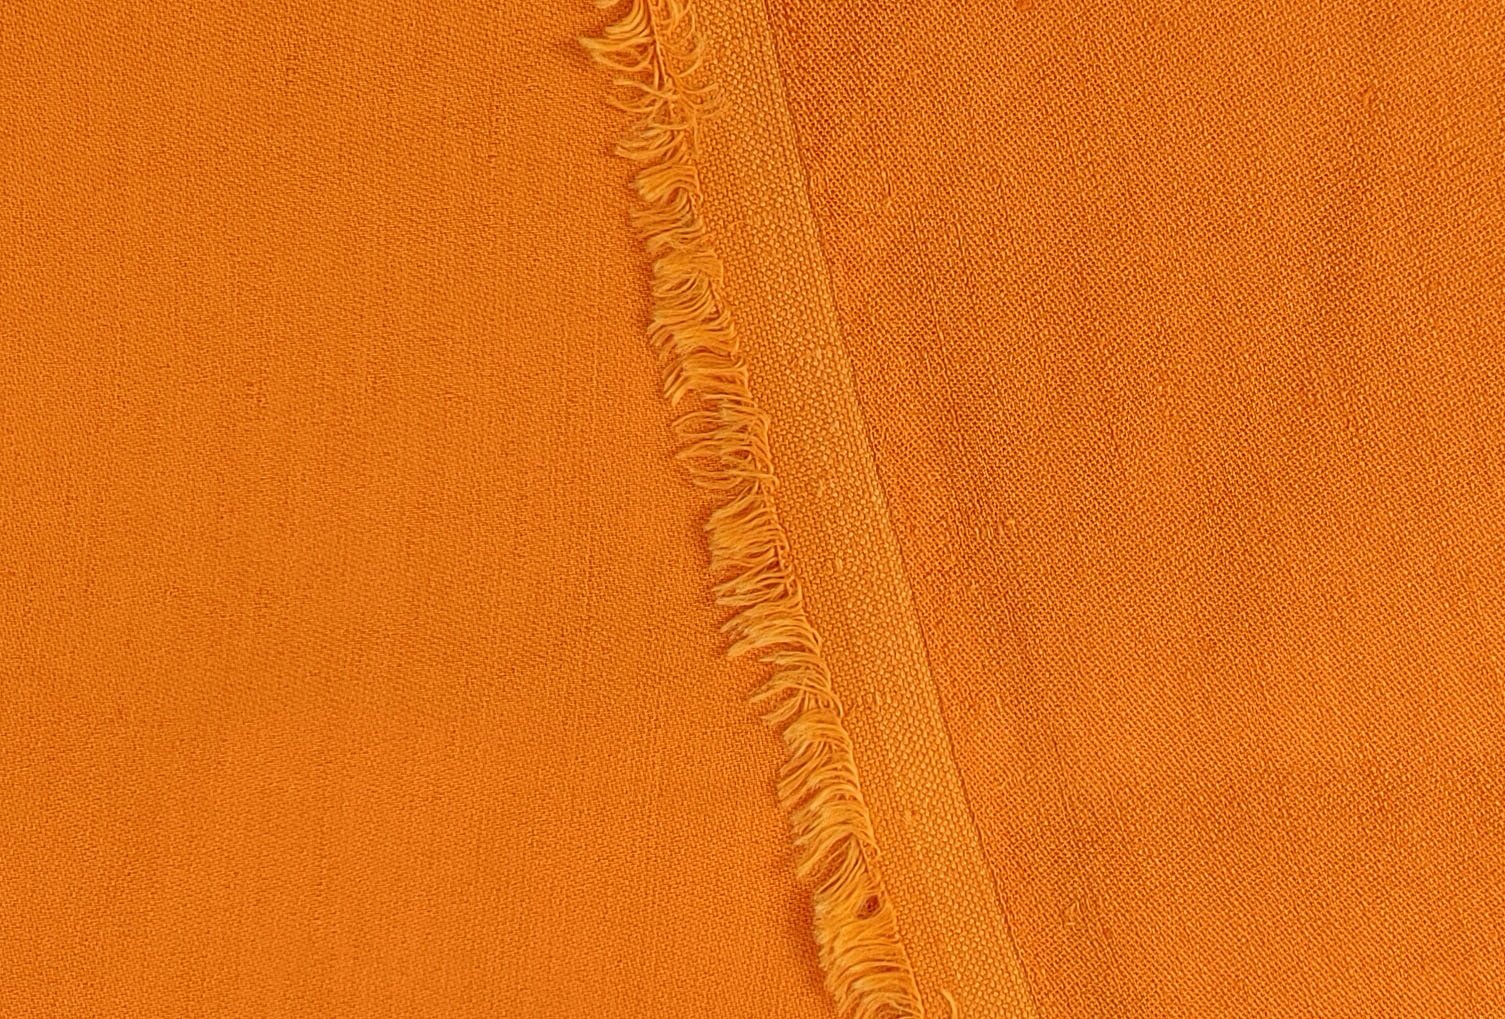 Satin Elegance: Linen Rayon Fabric with Polished Satin Weave 6090 6620 6659 7472 7293 - The Linen Lab - Orange